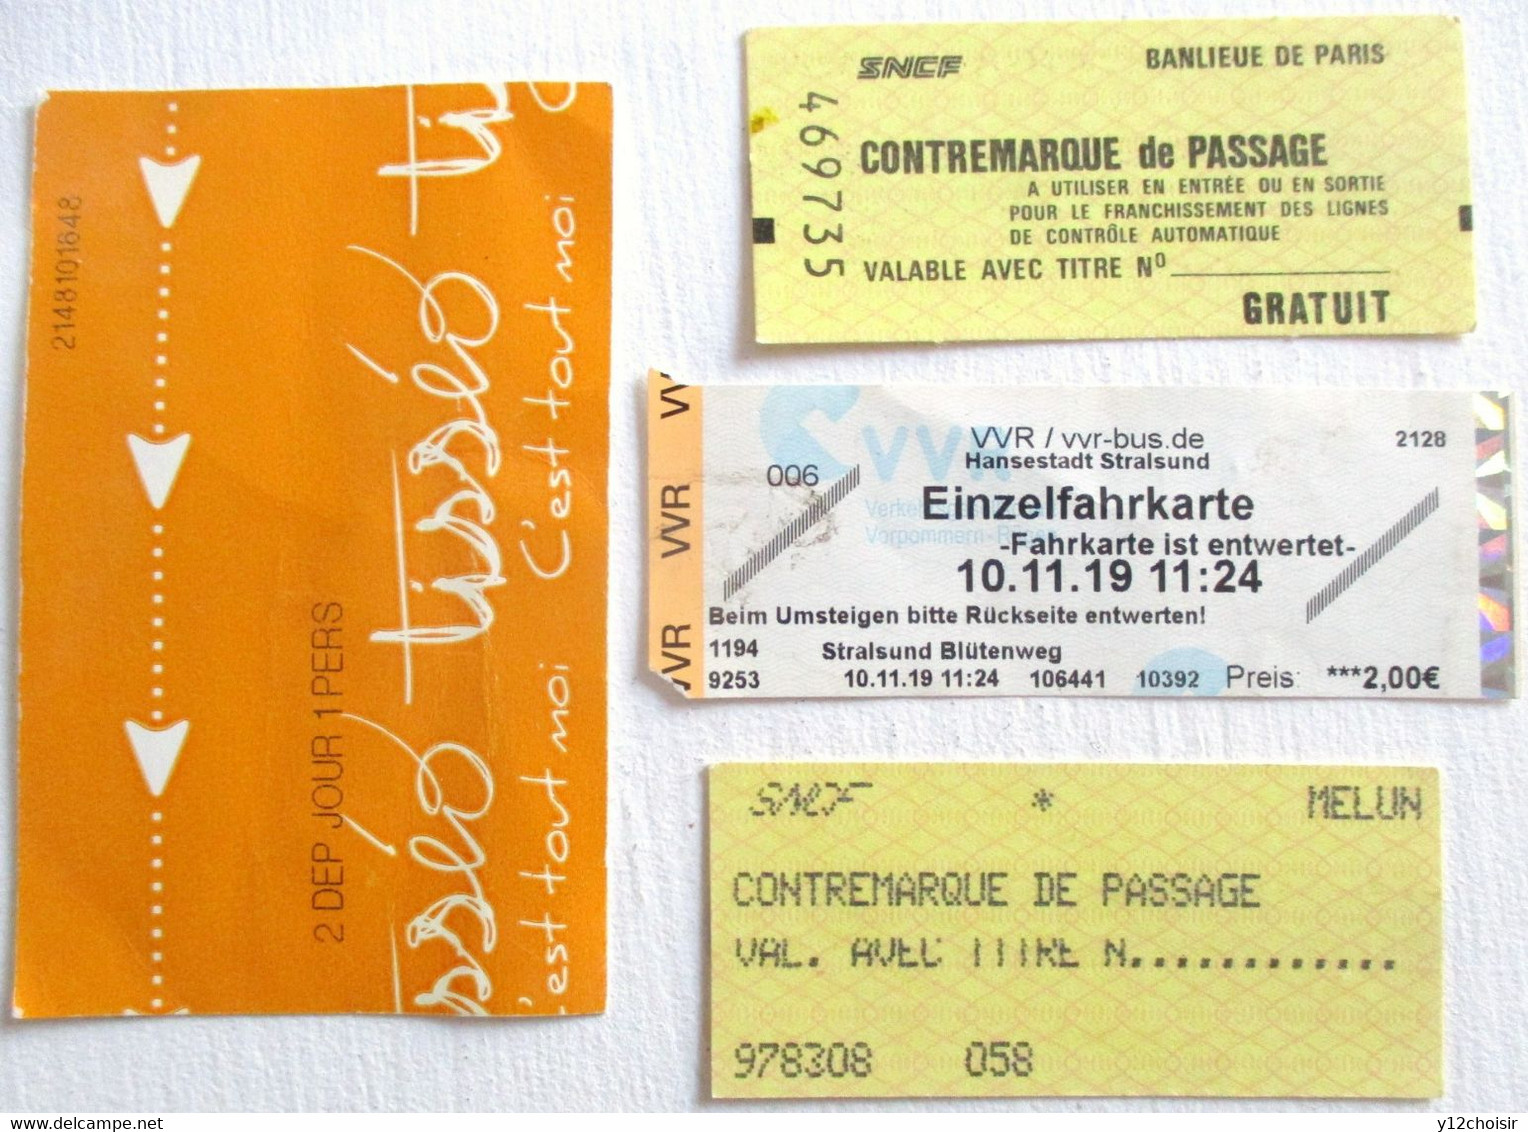 4 TICKETS DE TRANSPORT BUS TRAMWAY TISSEO CONTREMARQUE SNCF FRANCE - Europa